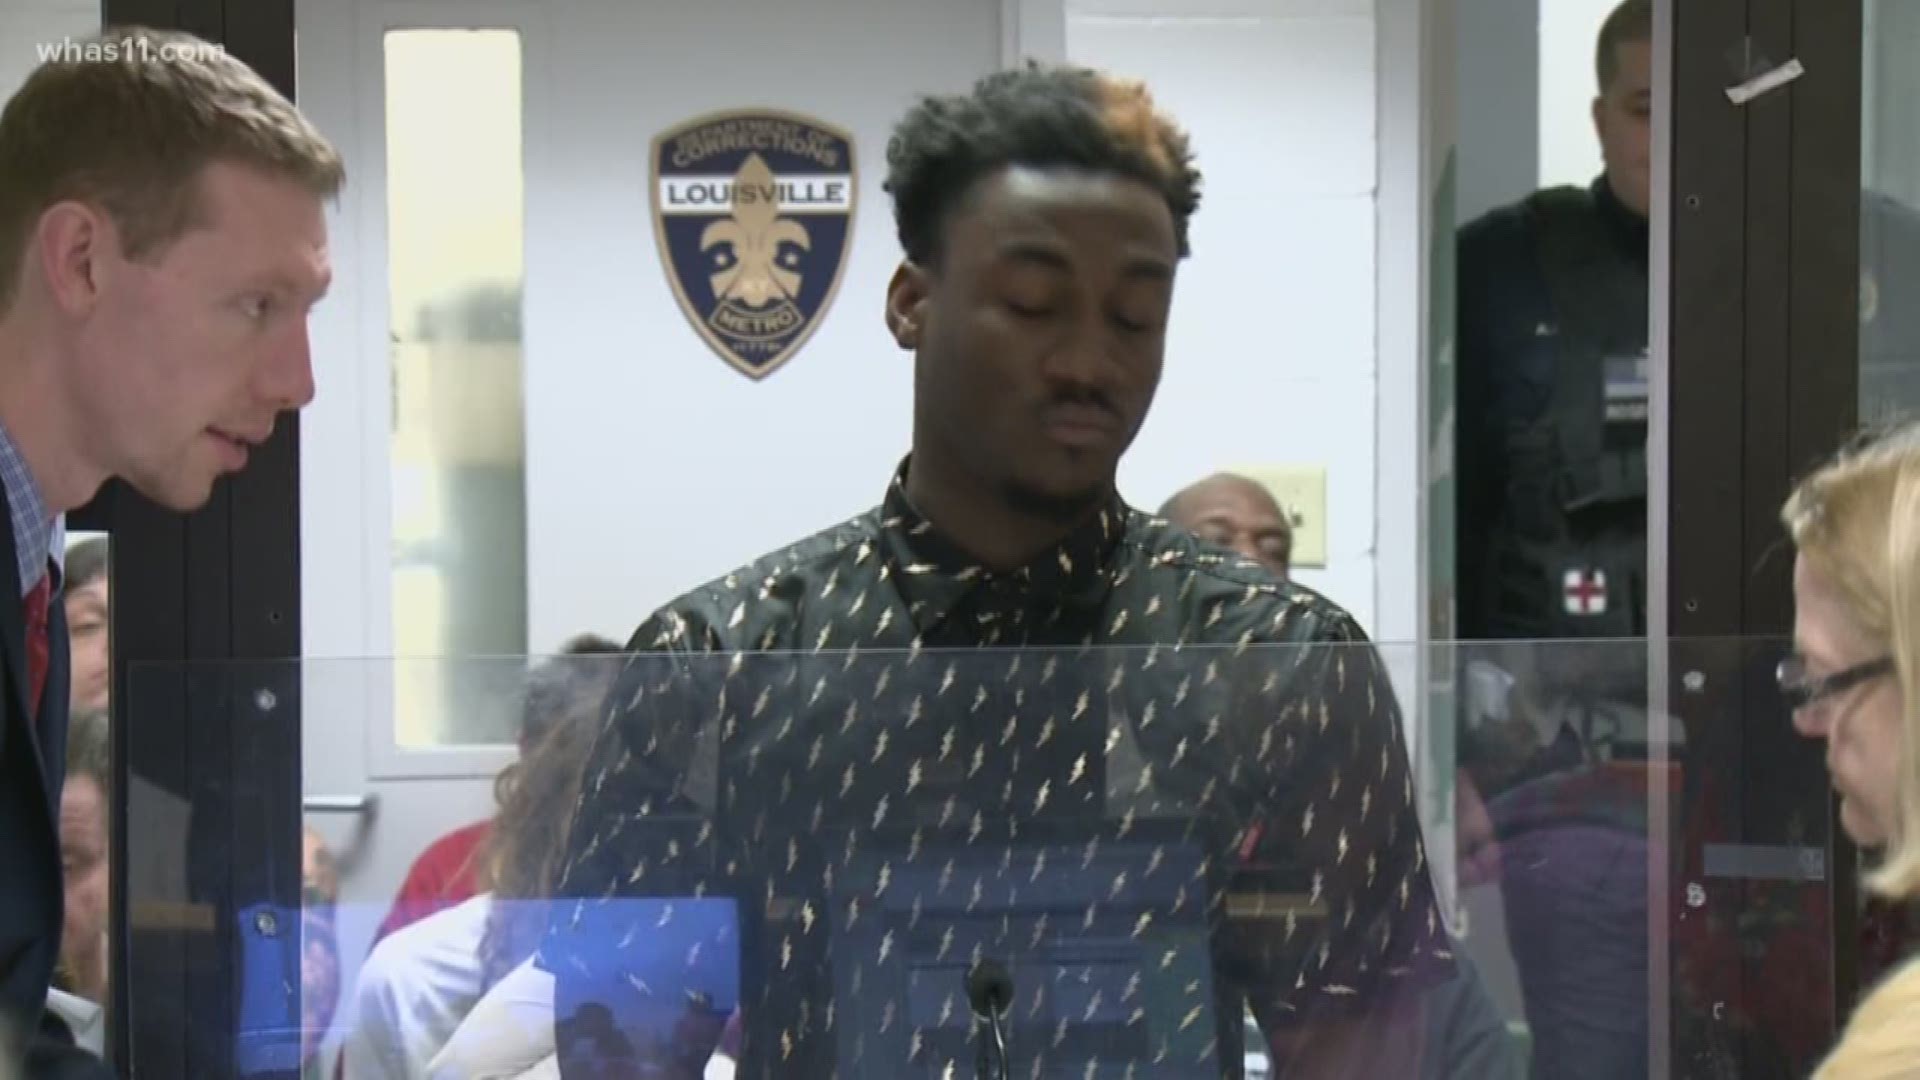 Alfred Kesseh is facing multiple charges including, burglary and rape.